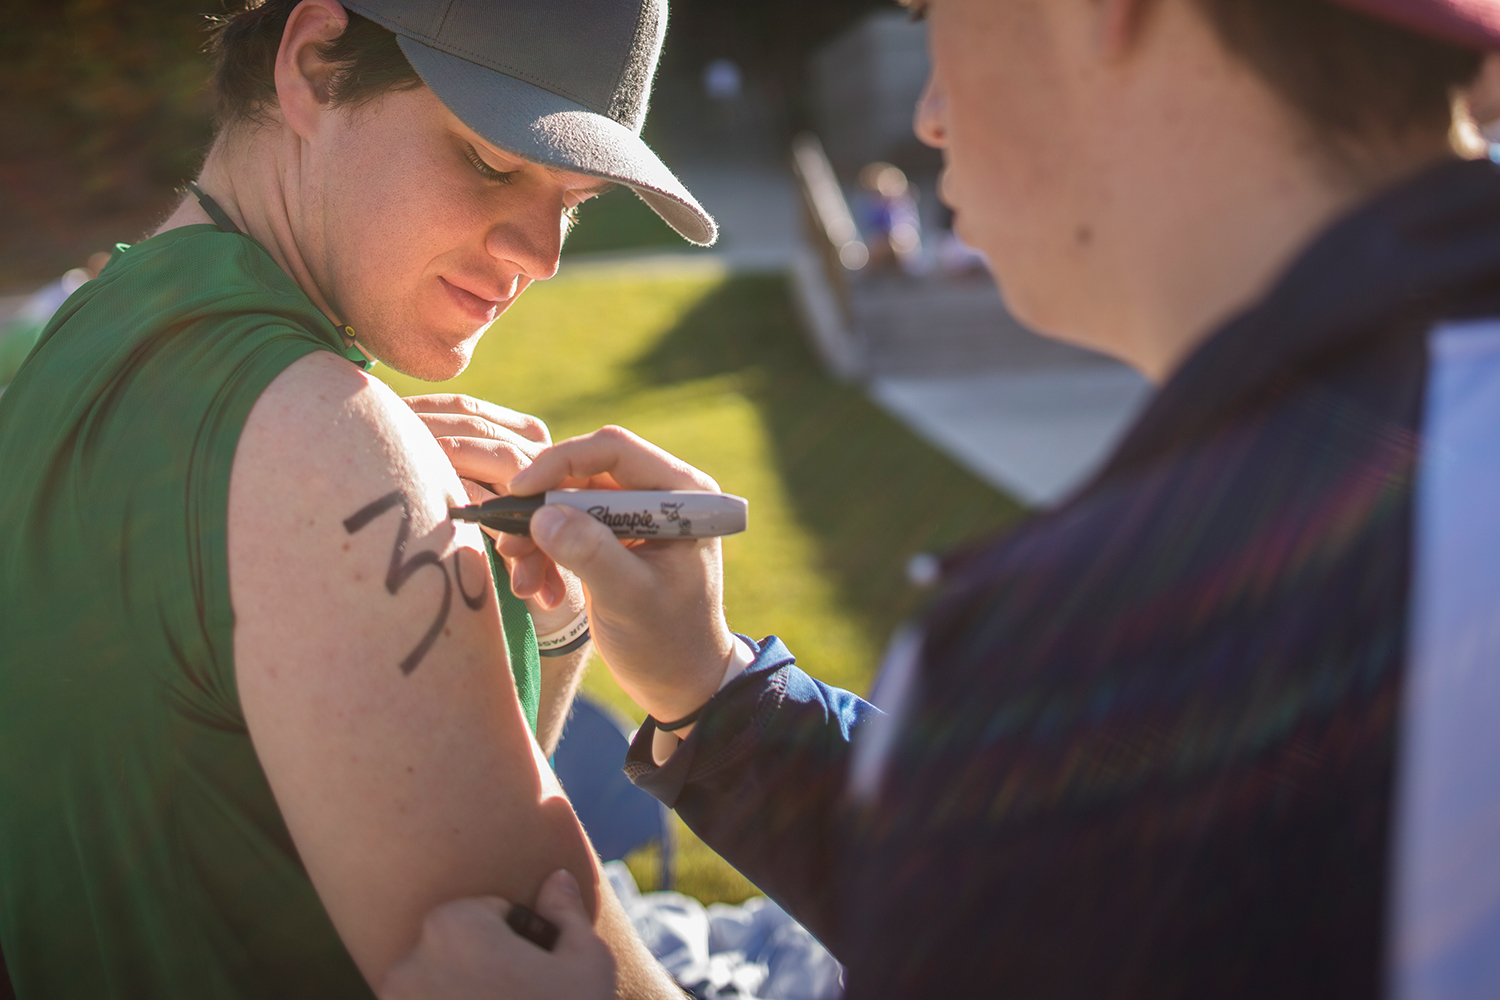 A triathlon participant is having his participant number drawn on his arm with a Sharpie.